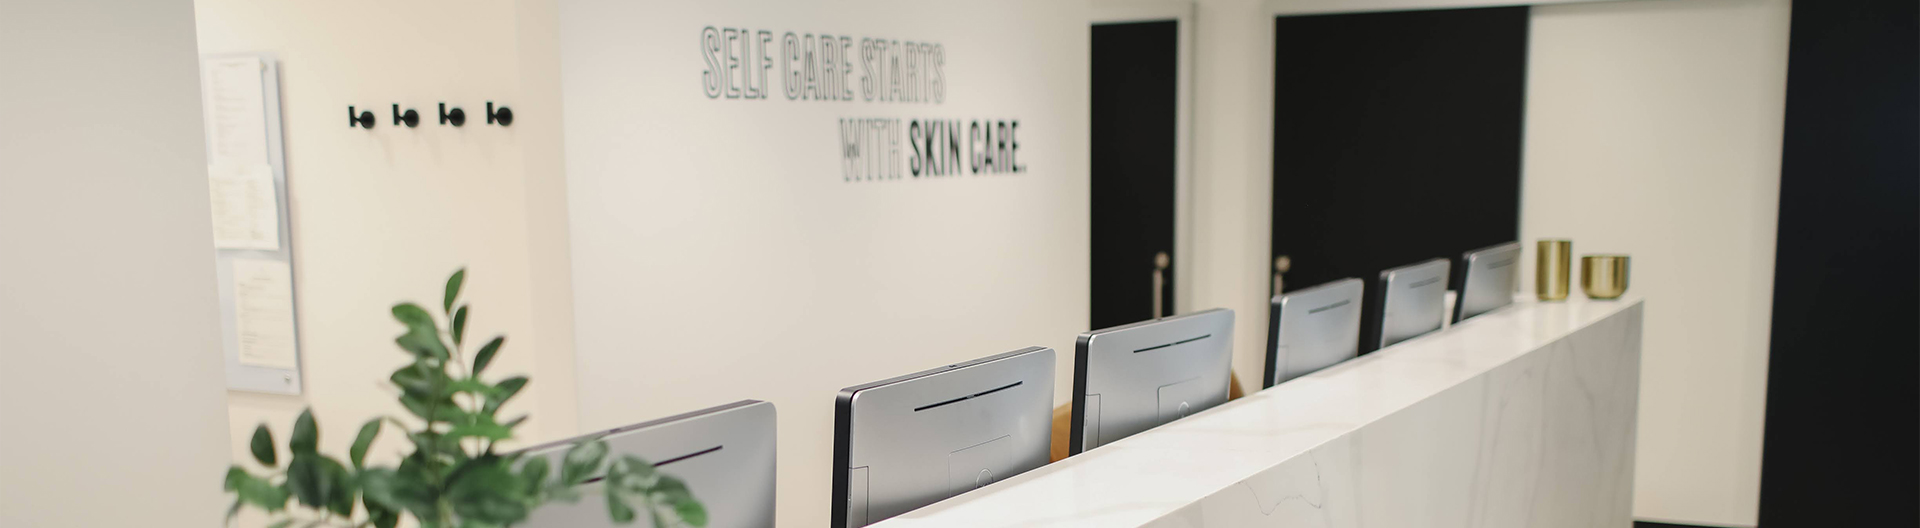 Office showing our self care starts with skin care sign